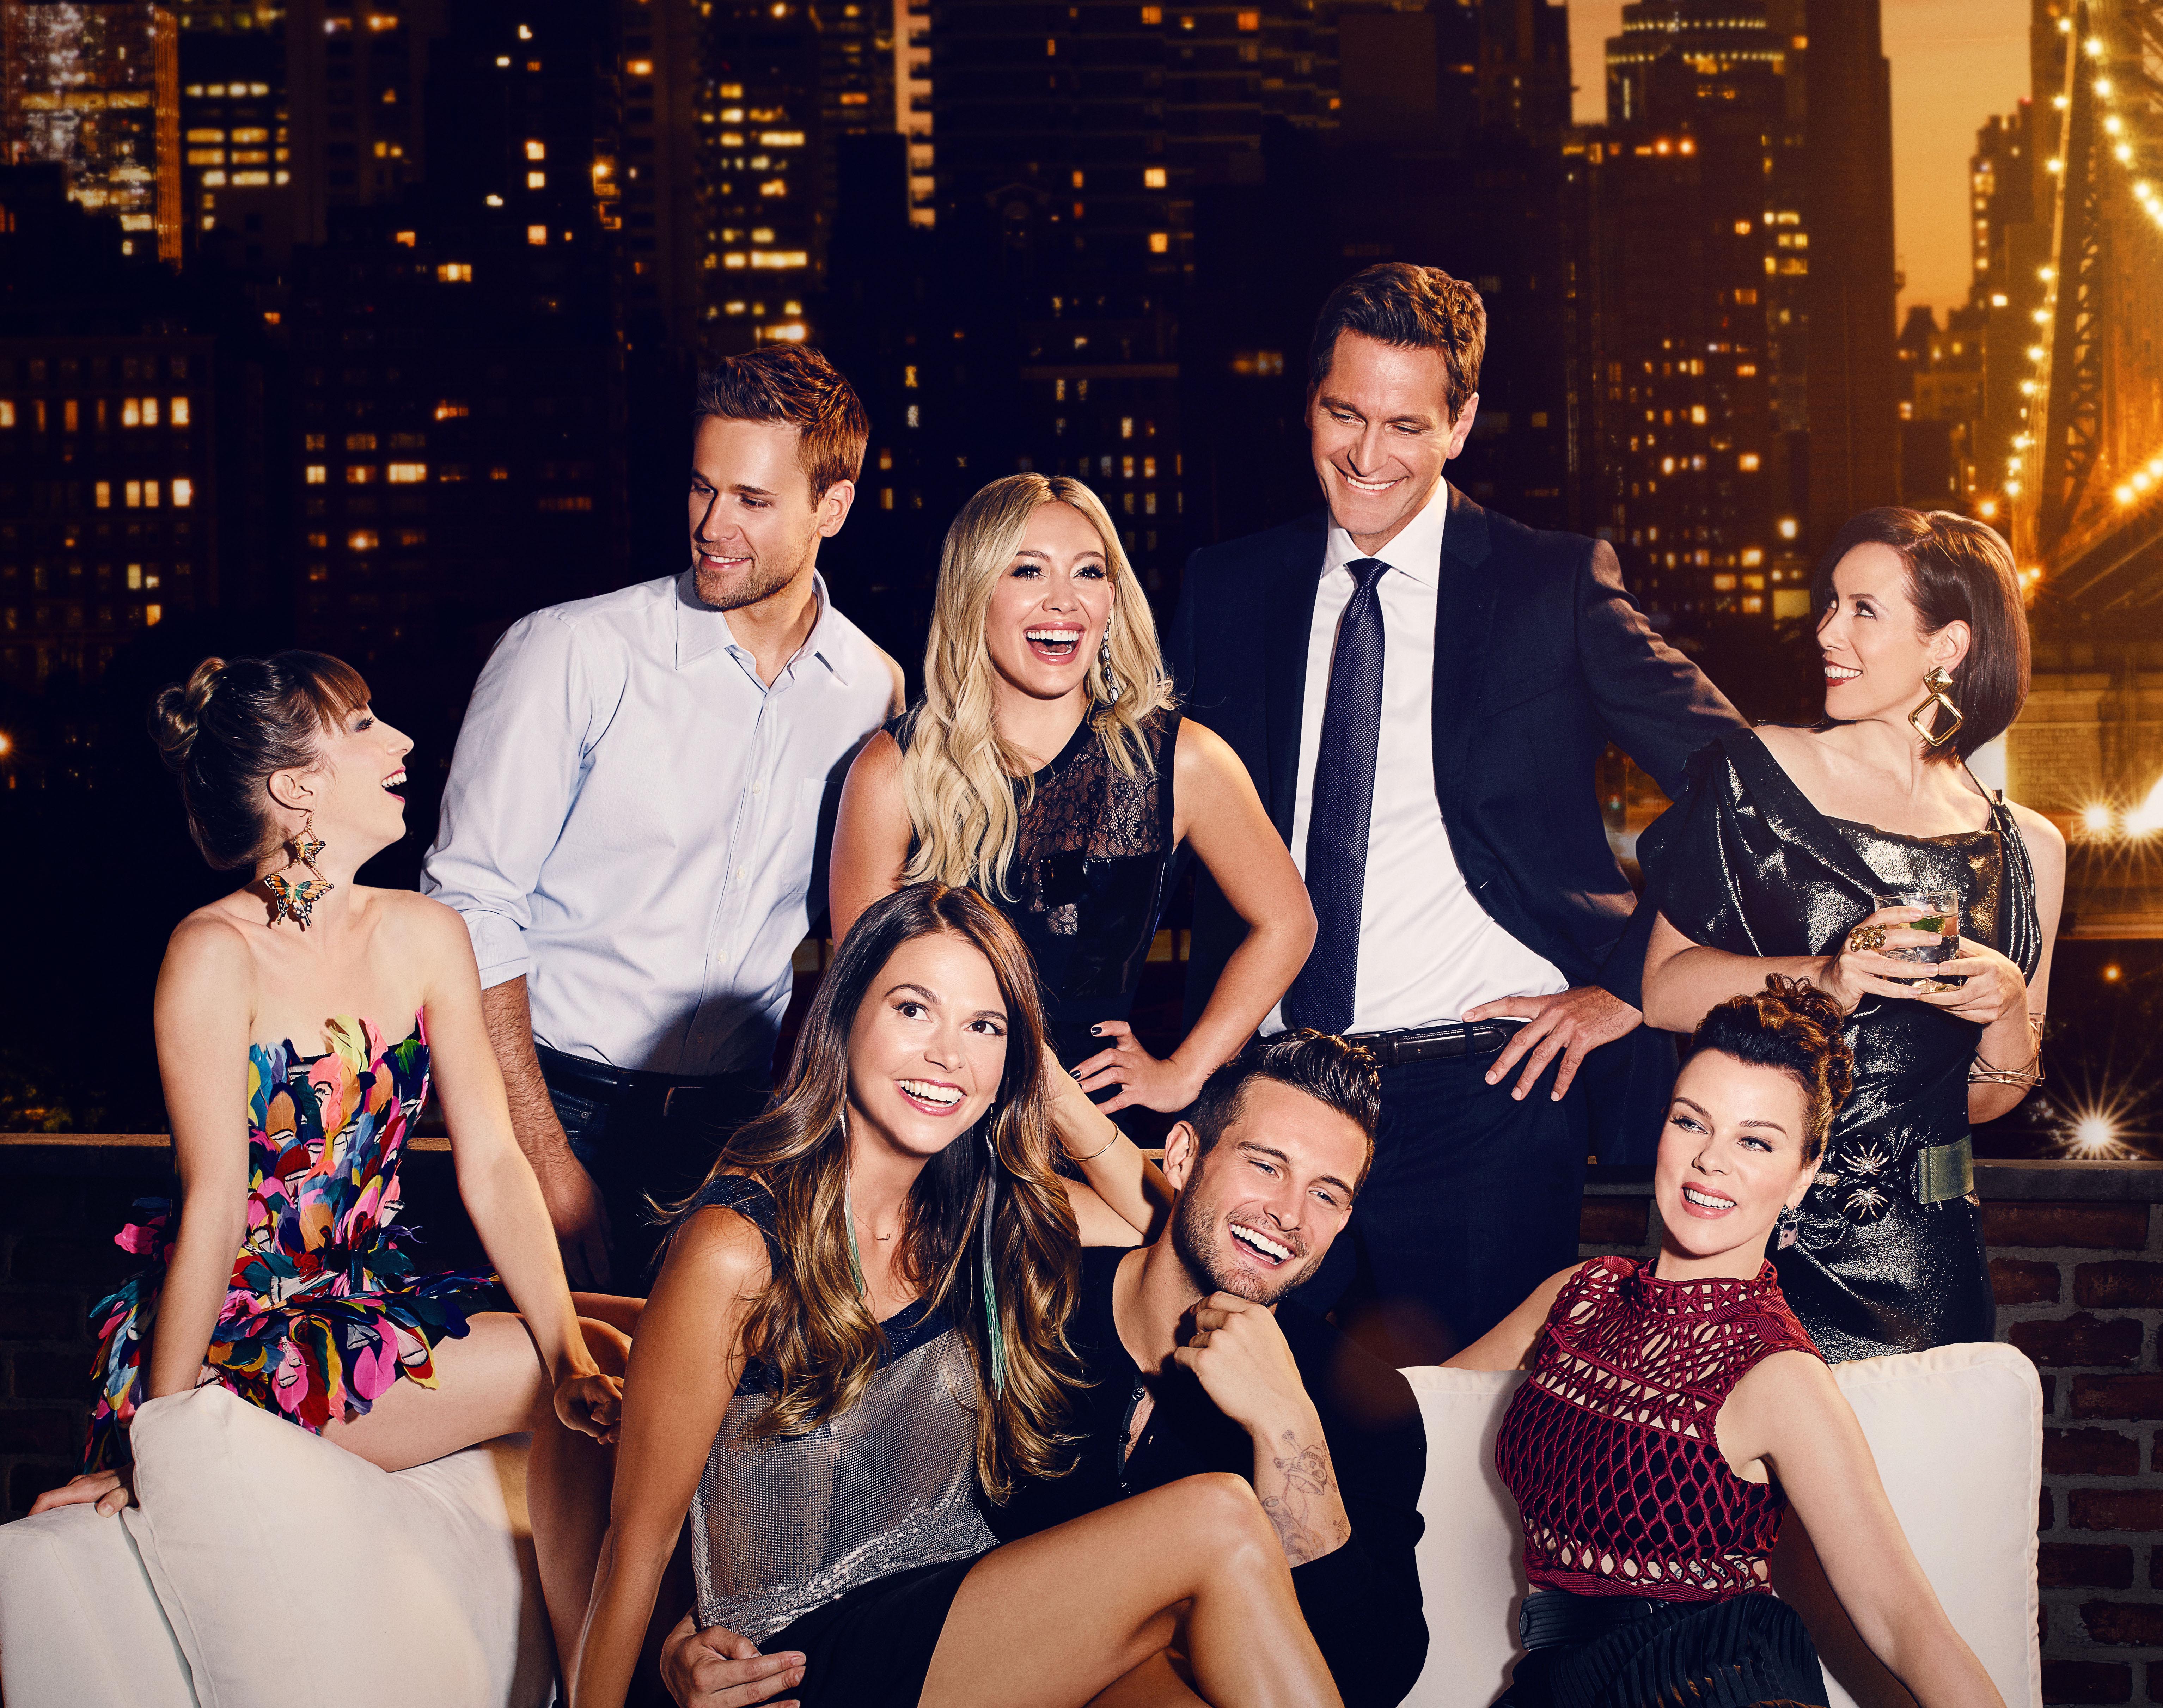 younger season 1 cast